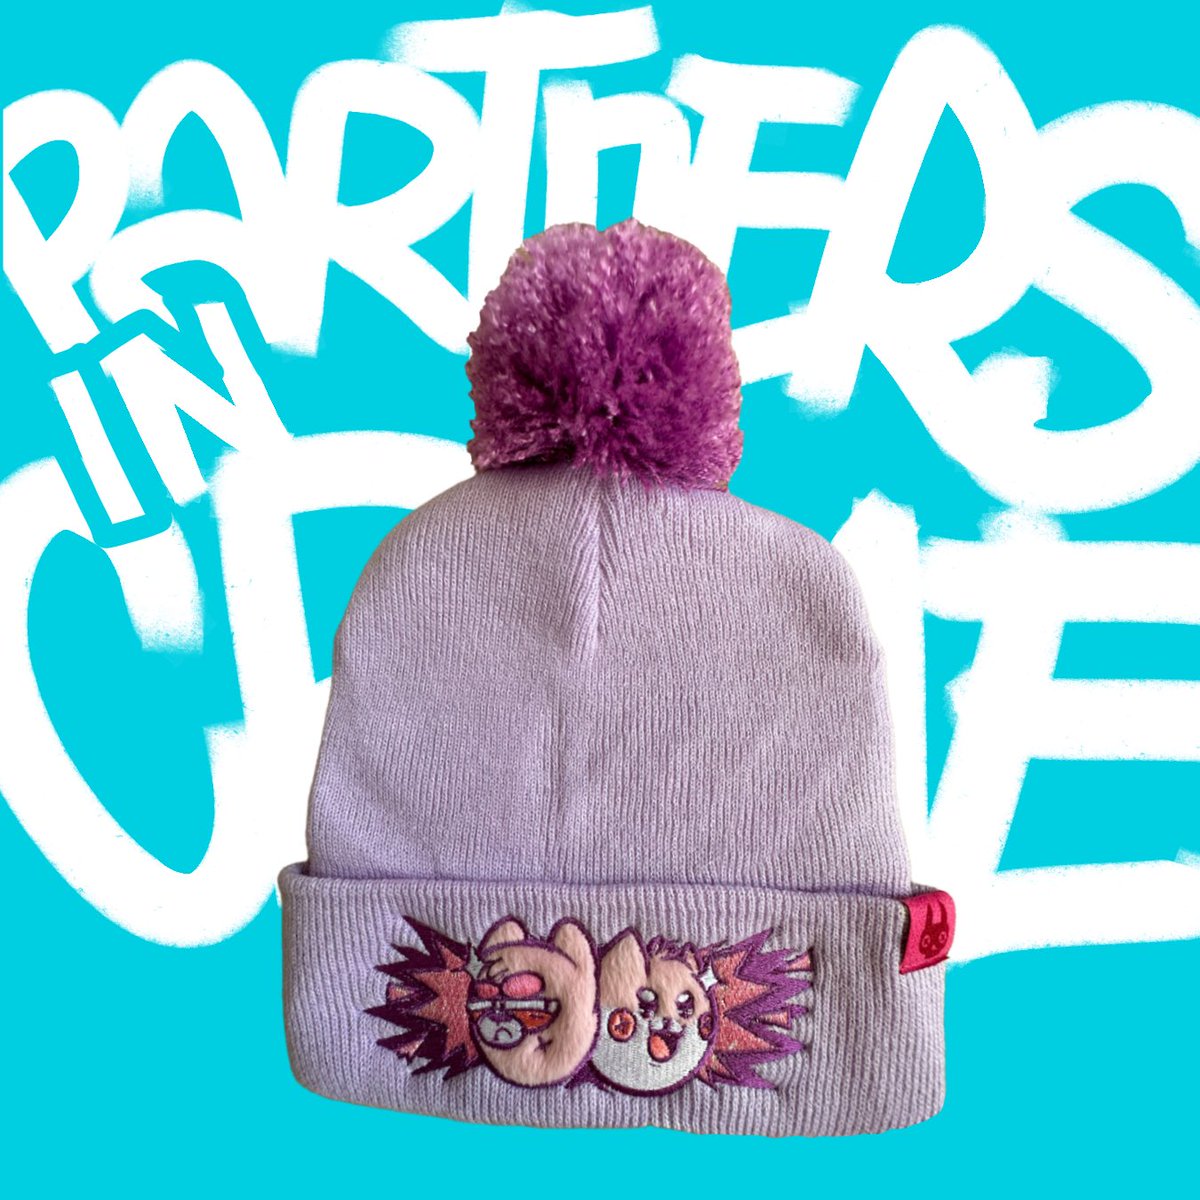 Partners in Crime Beanie! 💓 A perfect beanie if you want to feel cute and cozy ✨ Available now in our Etsy Store and Artychikle.com 
etsy.me/3YxEvbM 
#kawaii #catlover #catkawaii #shibalove #beanies #beaniehat